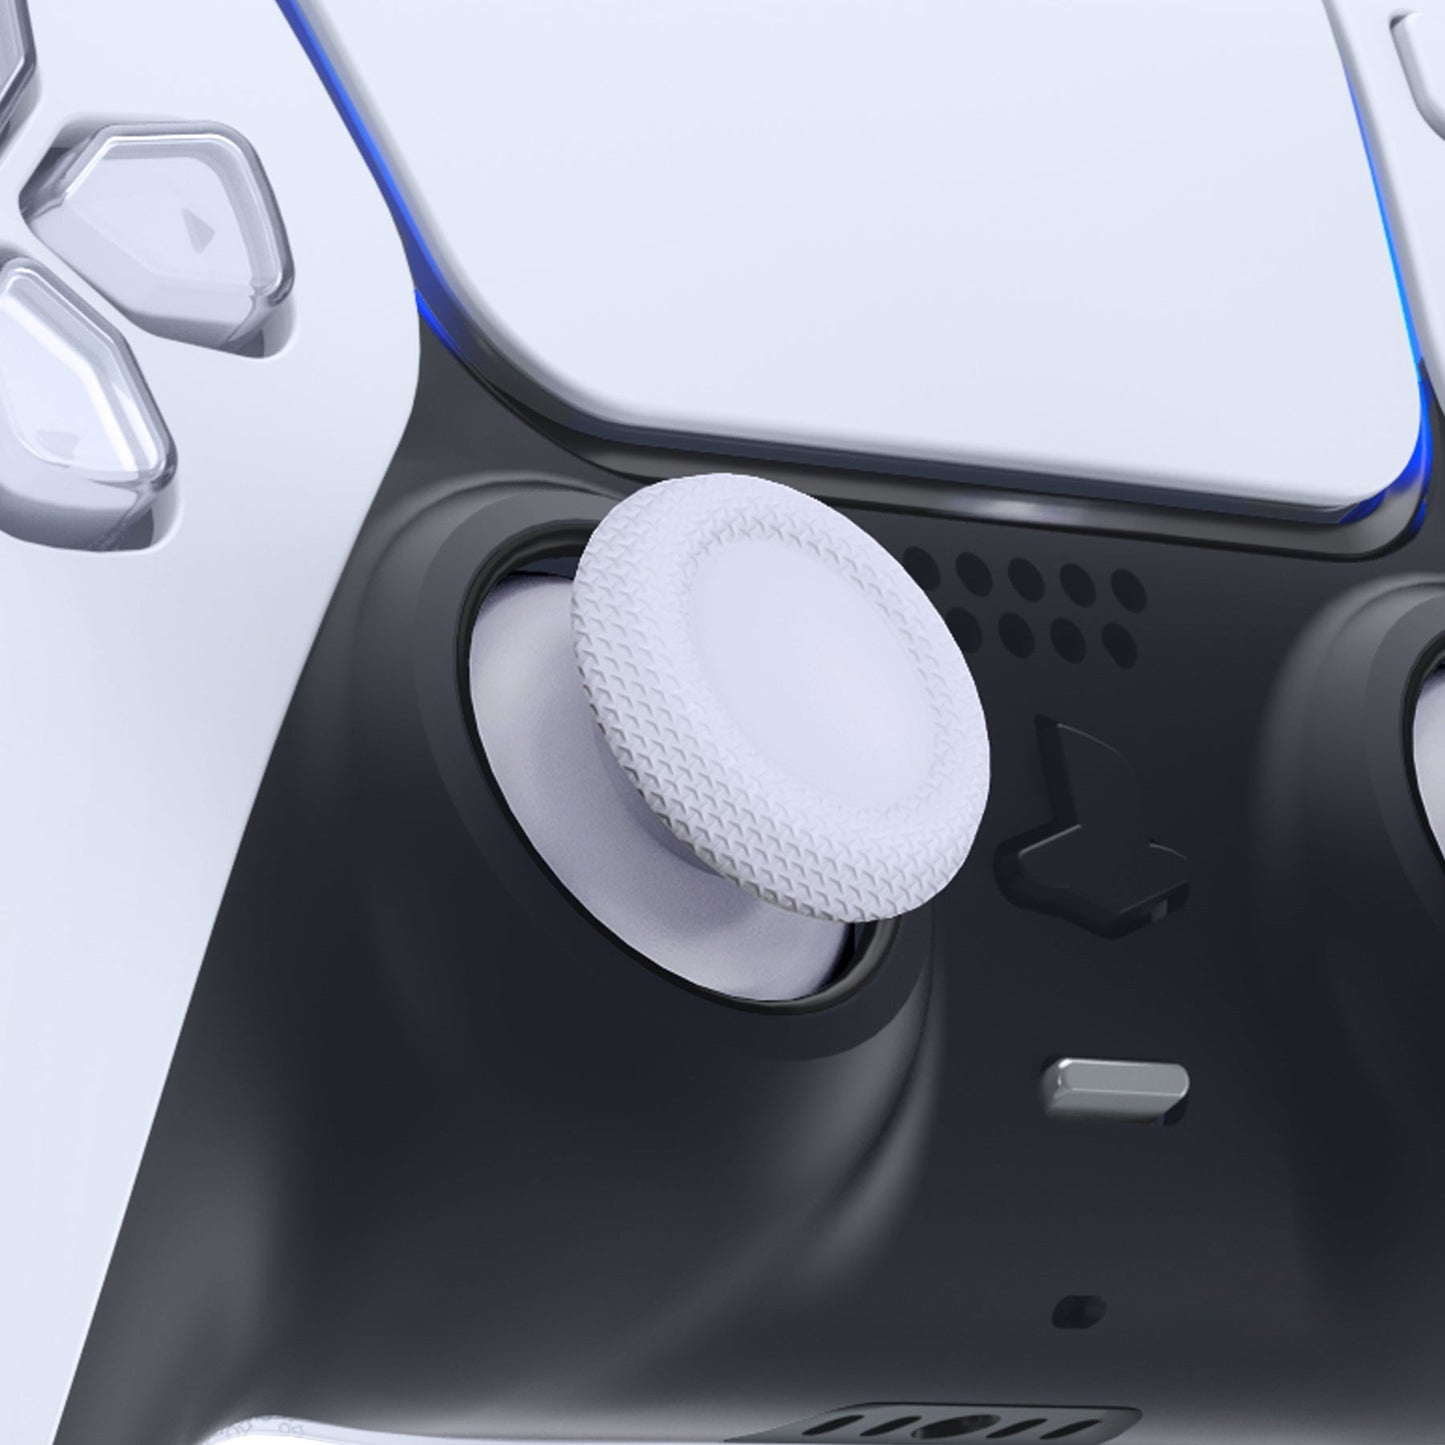 eXtremeRate Retail White Replacement Thumbsticks for ps5 Controller, Custom Analog Stick Joystick Compatible with ps5, for ps4 All Model Controller - JPF606